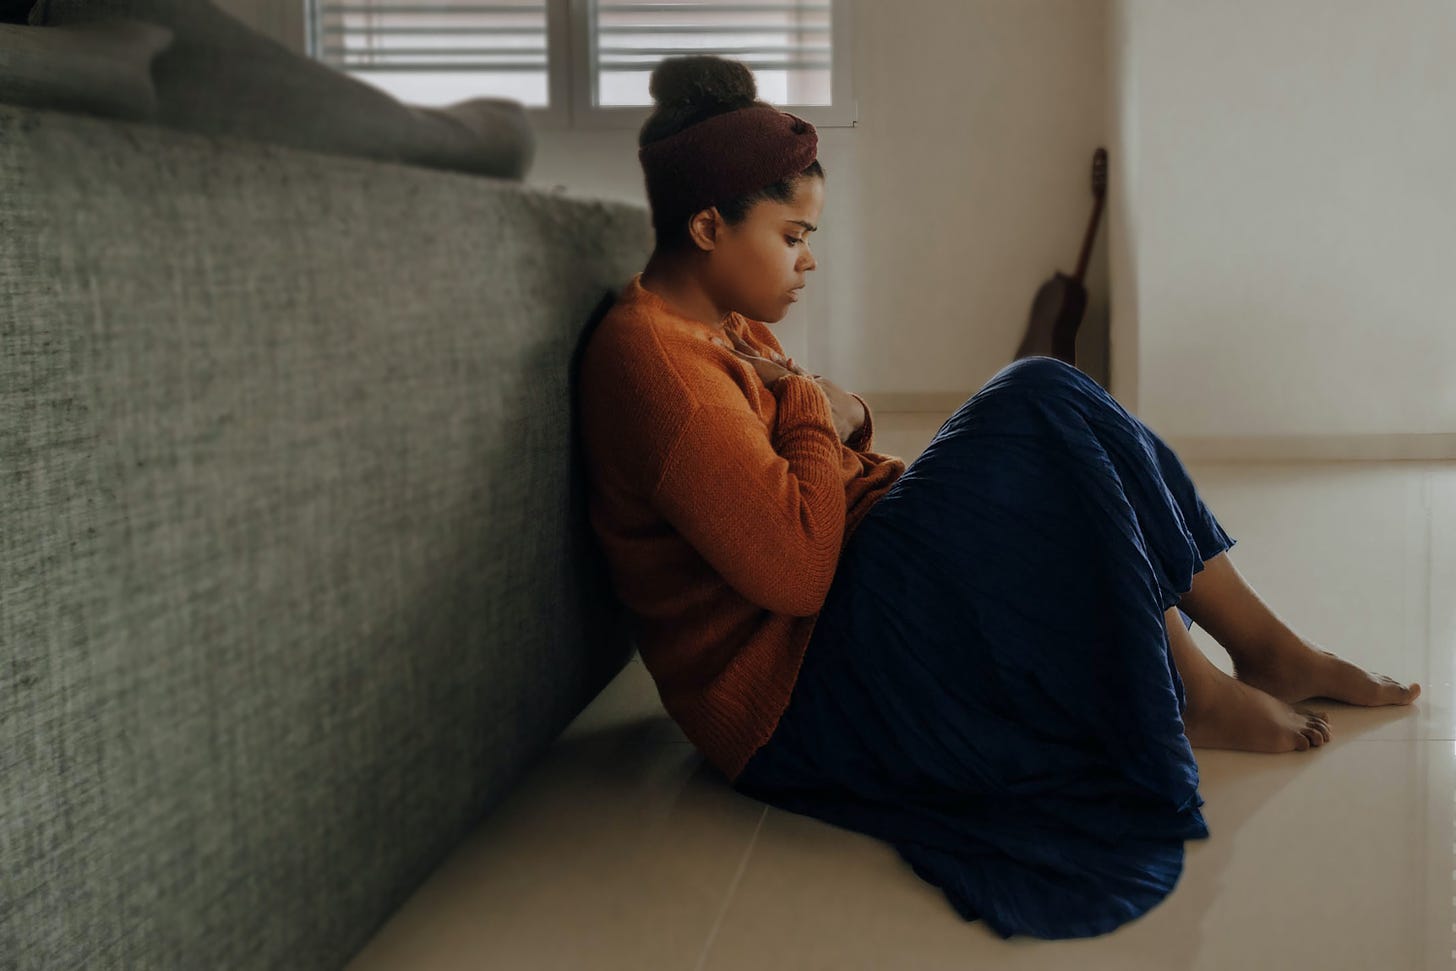 A young person sits behind a couch, holding her hands to her chest and looking worried.